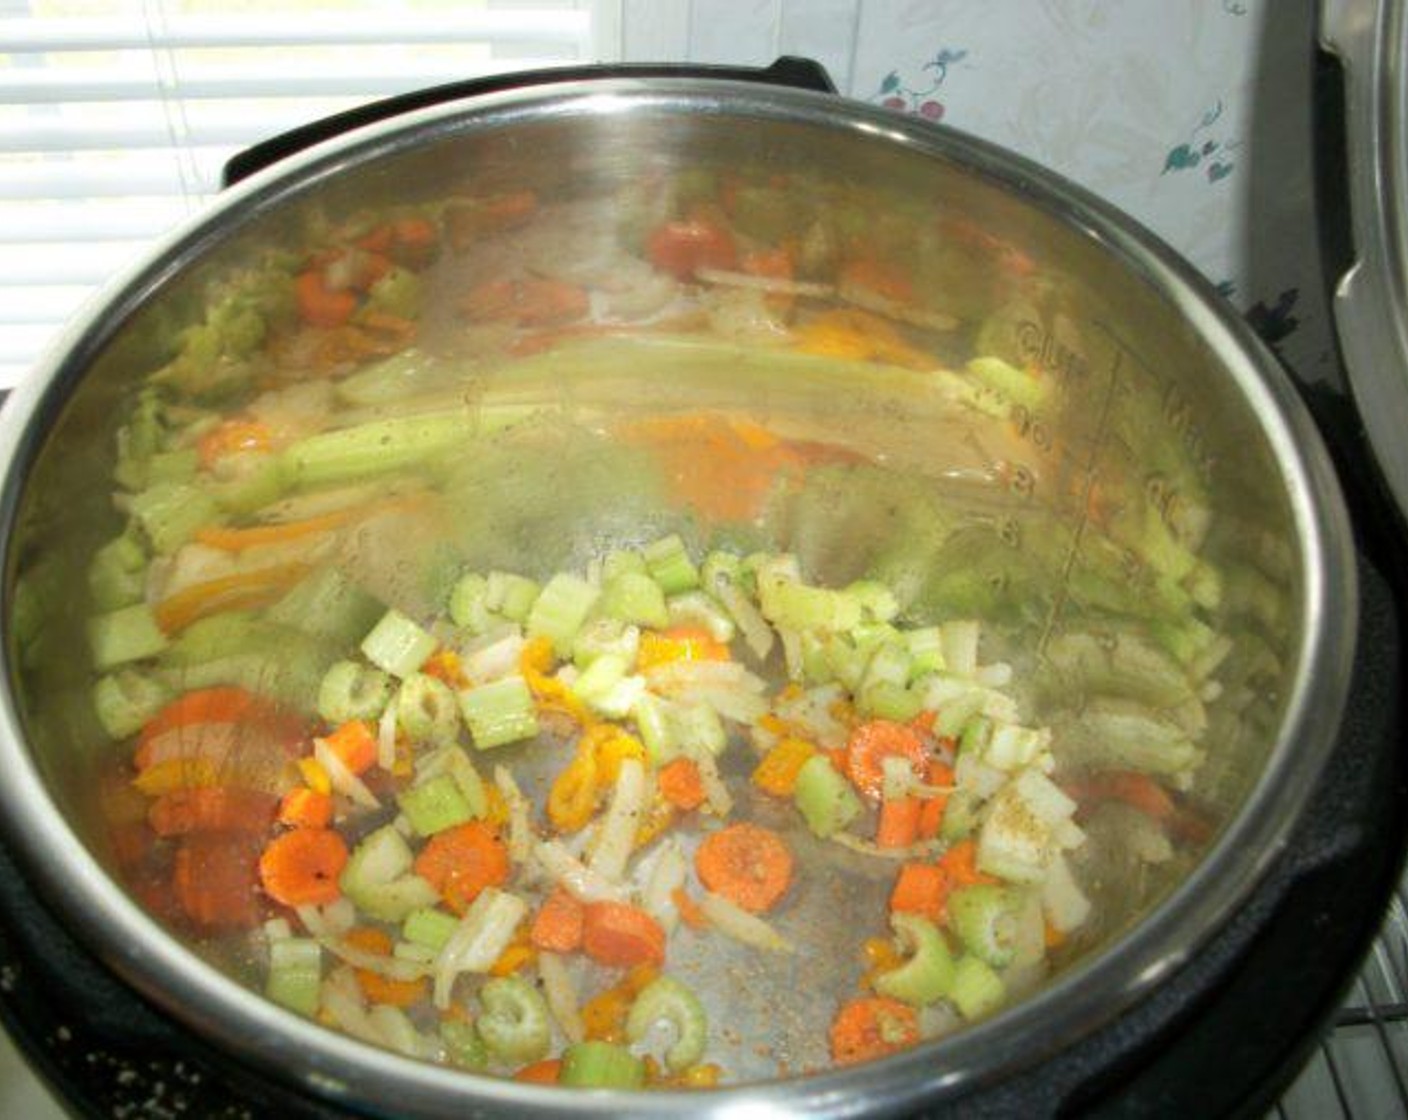 step 2 Sauté Onion (1/2 cup), Celery (1/2 cup), Carrot (1/2 cup), and Bell Pepper (1/4 cup) for two minutes. Stir frequently. Add Salt (1 tsp) and Ground Black Pepper (1/2 tsp). Turn off heat.